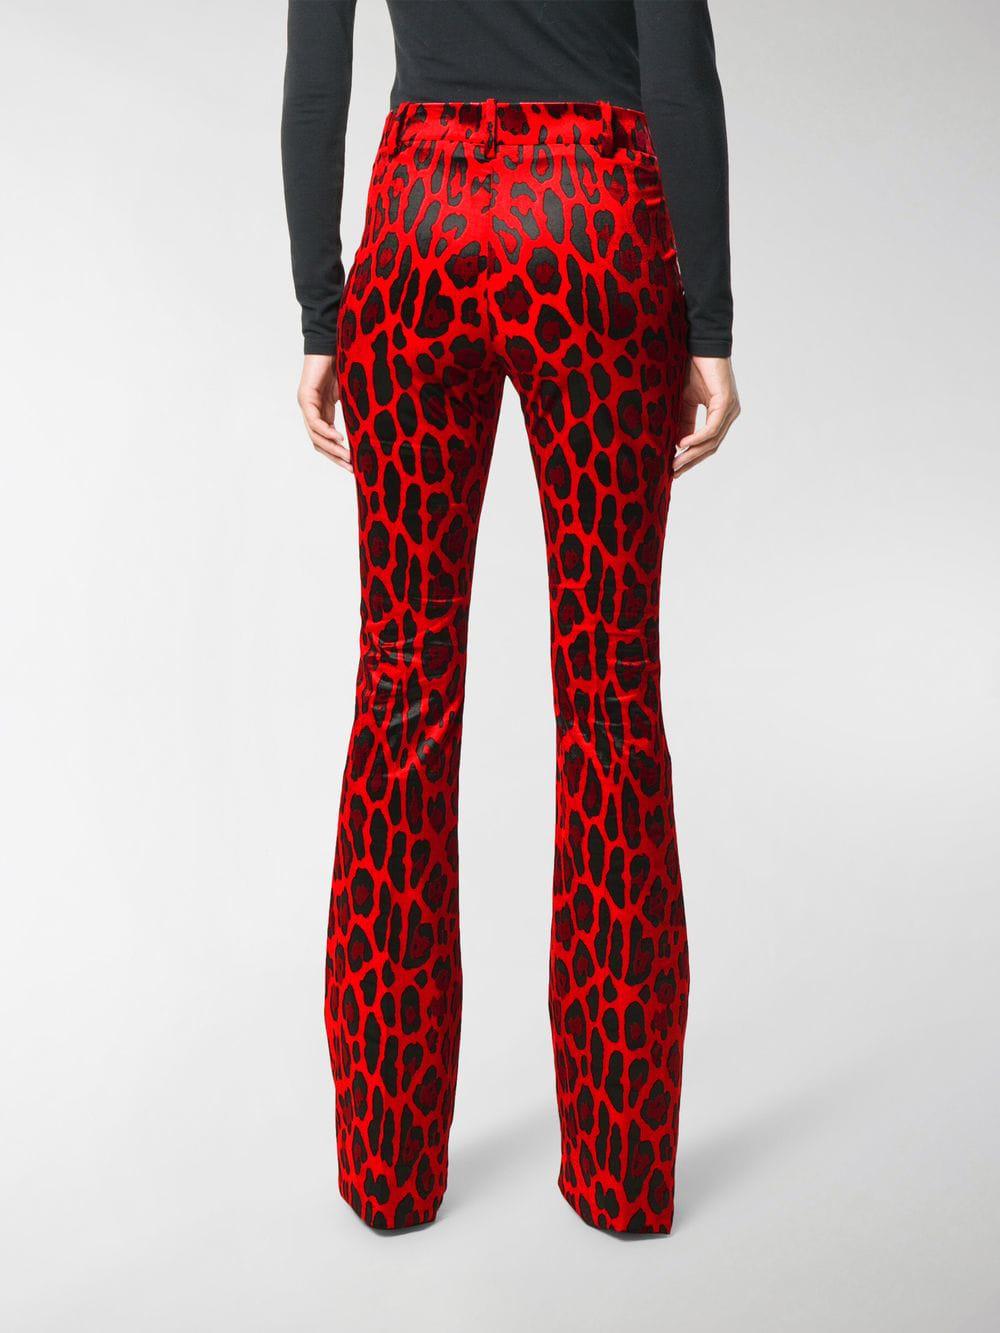 Tom Ford Cheetah Printed Trousers in Red | Lyst